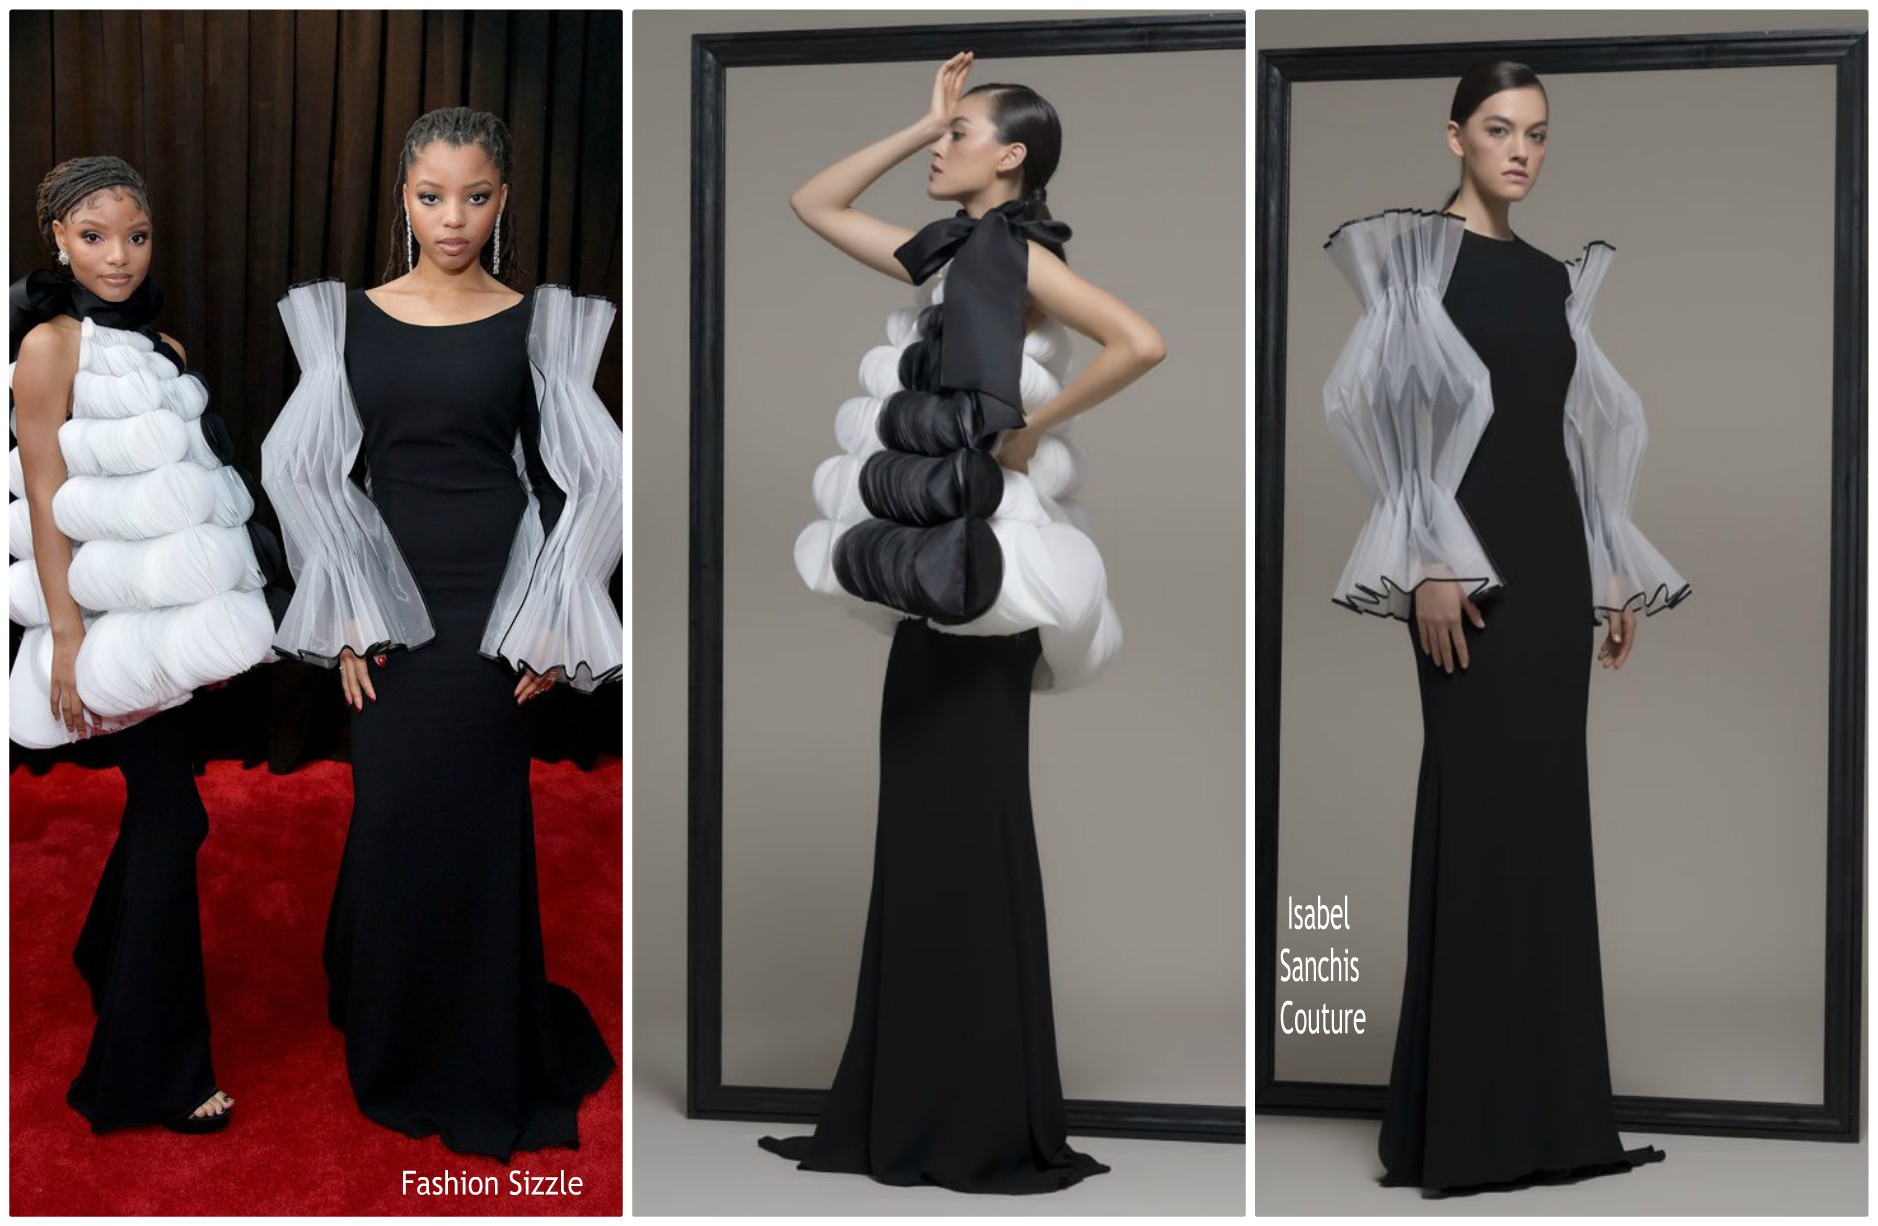 chloe-x-halle-in-isabel-sanchis-couture-2019-grammy-awards